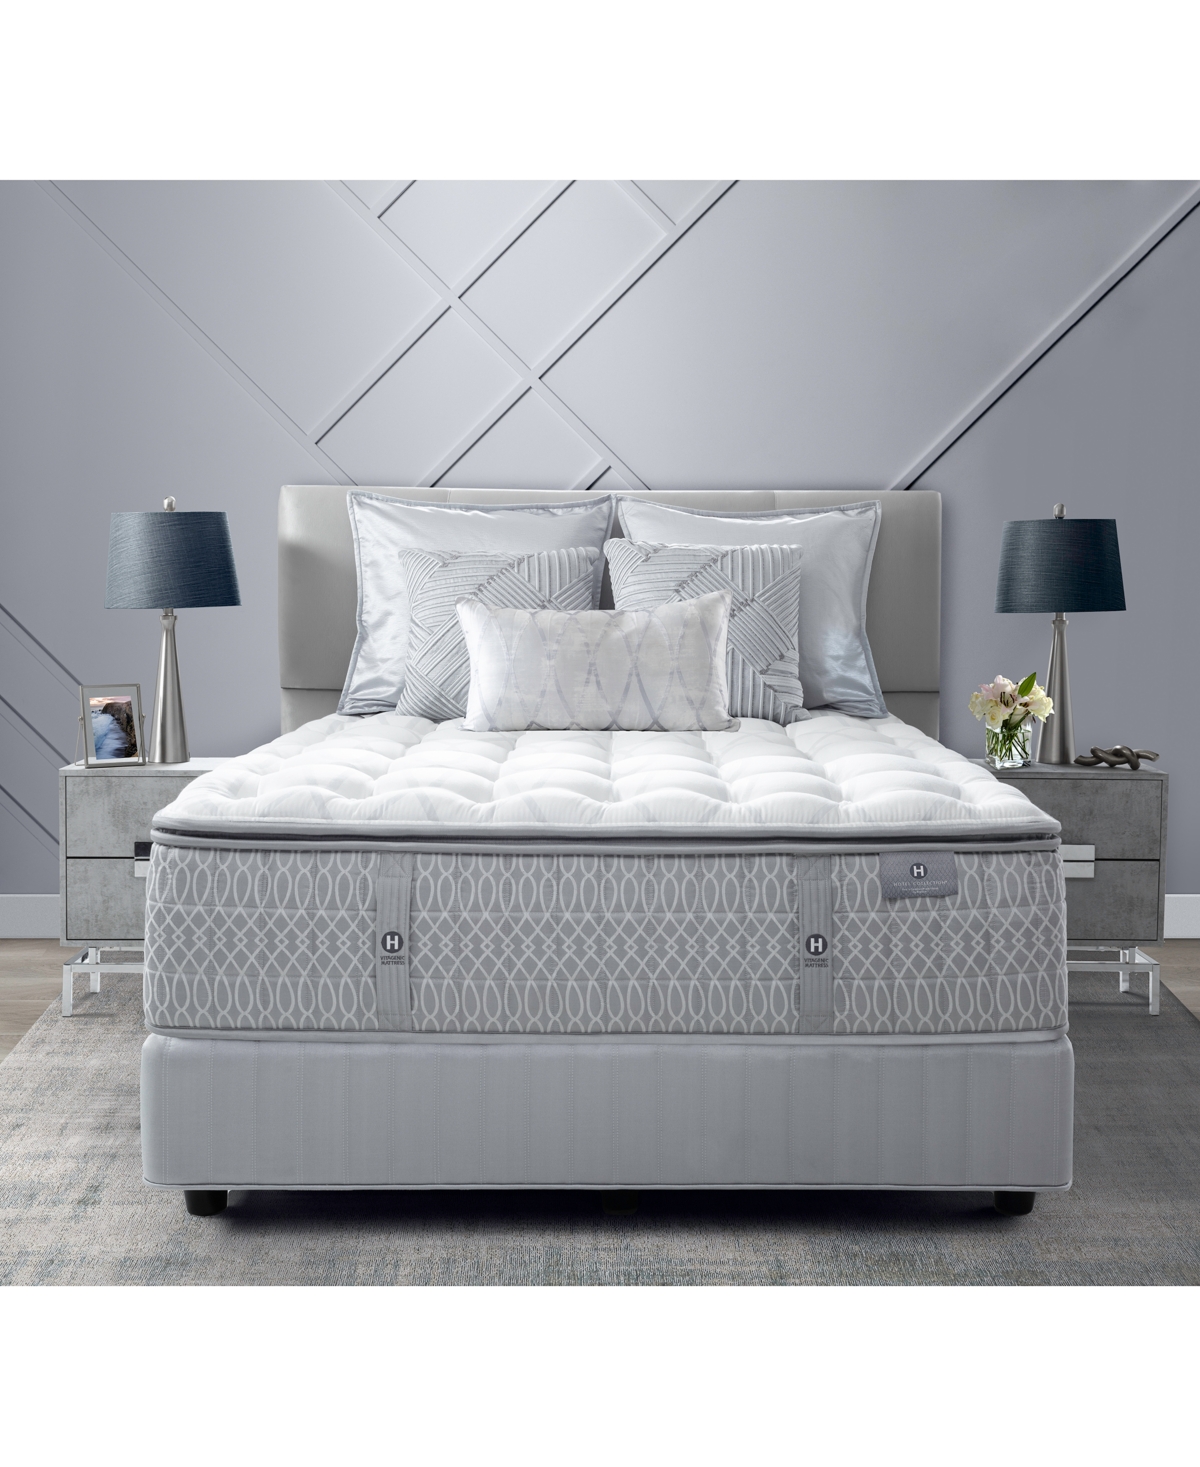 Hotel Collection Hotel Grand By Aireloom 14.5" Luxury Firm Mattress In No Color